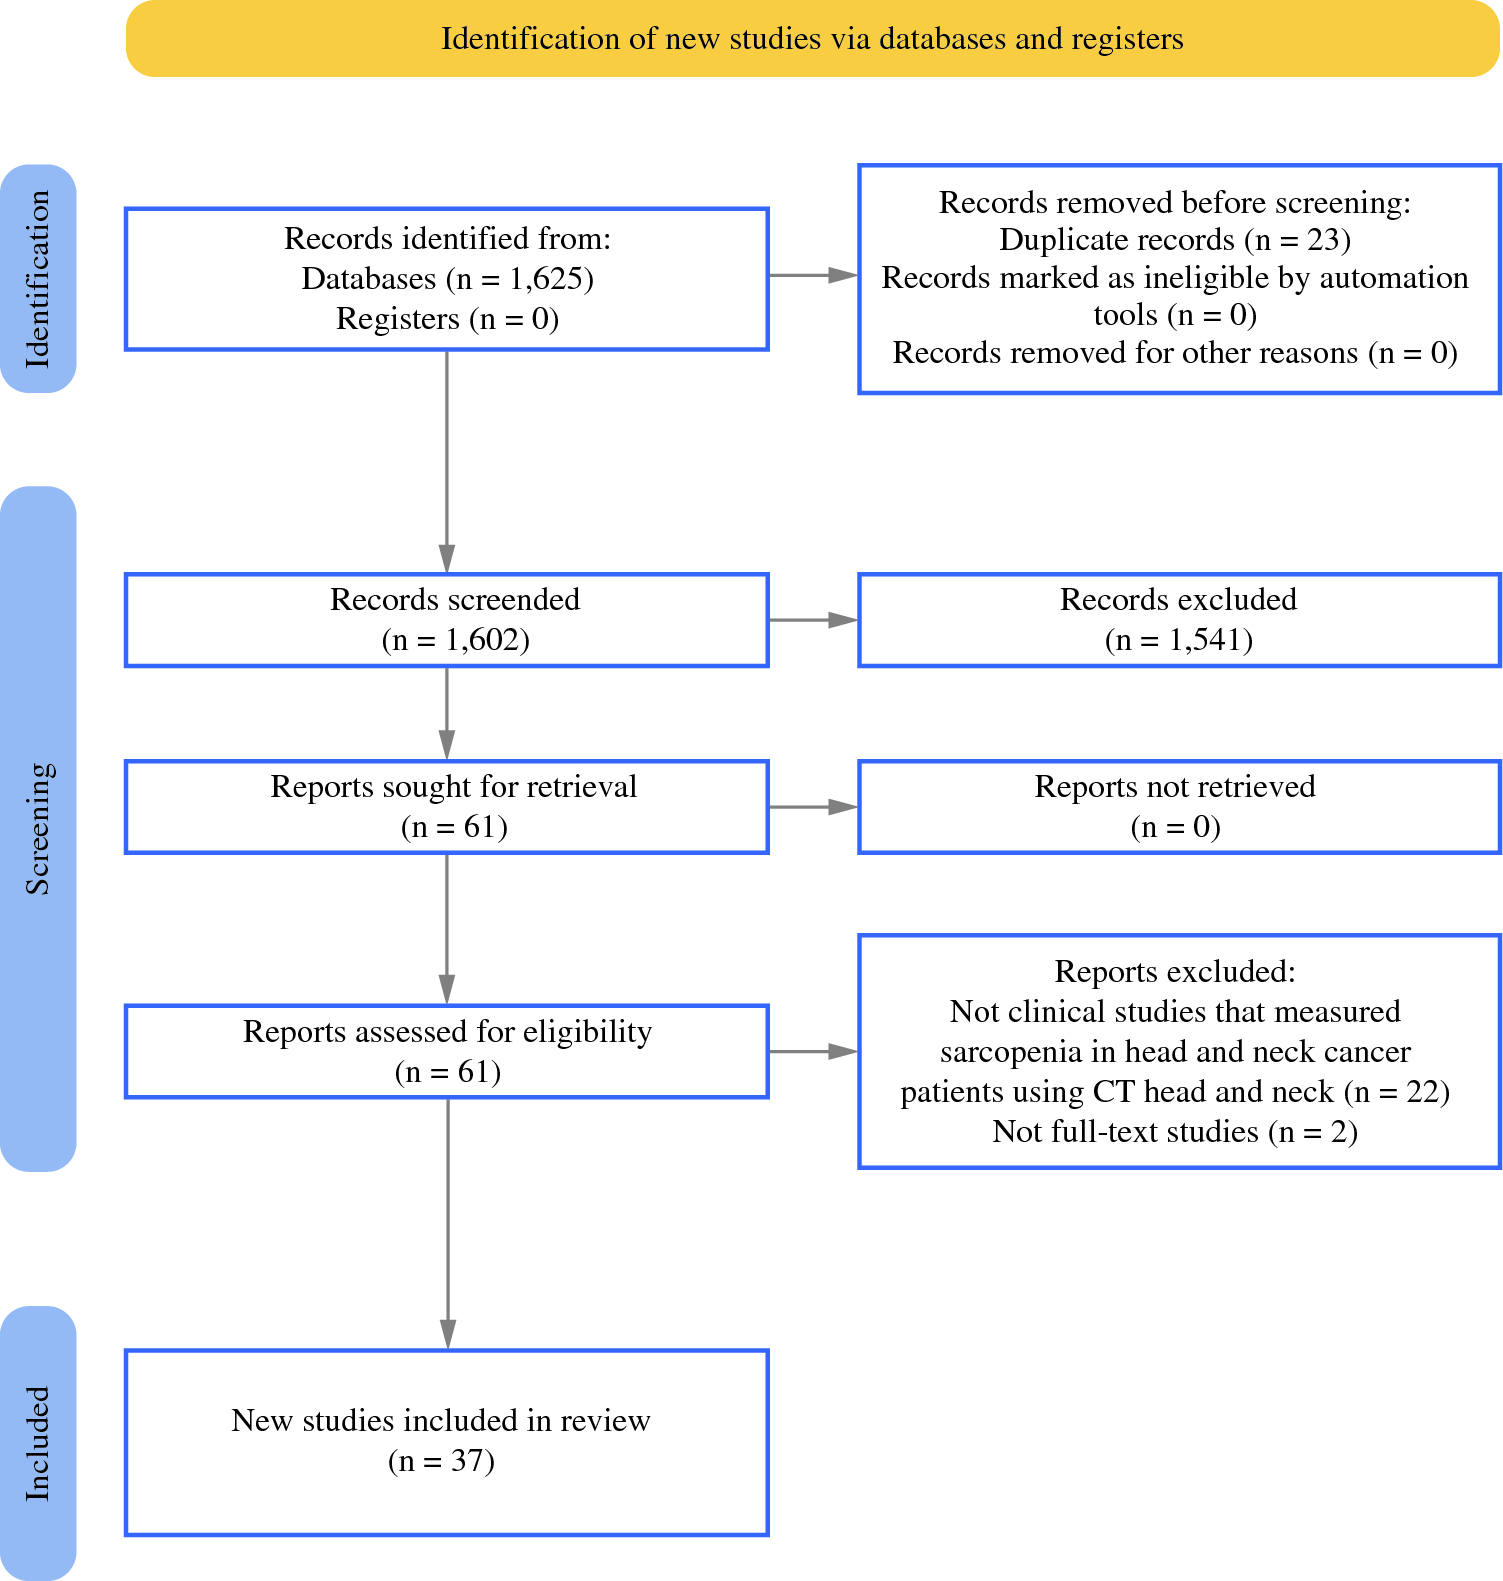 Prevalence and Association of Sarcopenia with Mortality in Patients with Head and Neck Cancer: A Systematic Review and Meta-Analysis